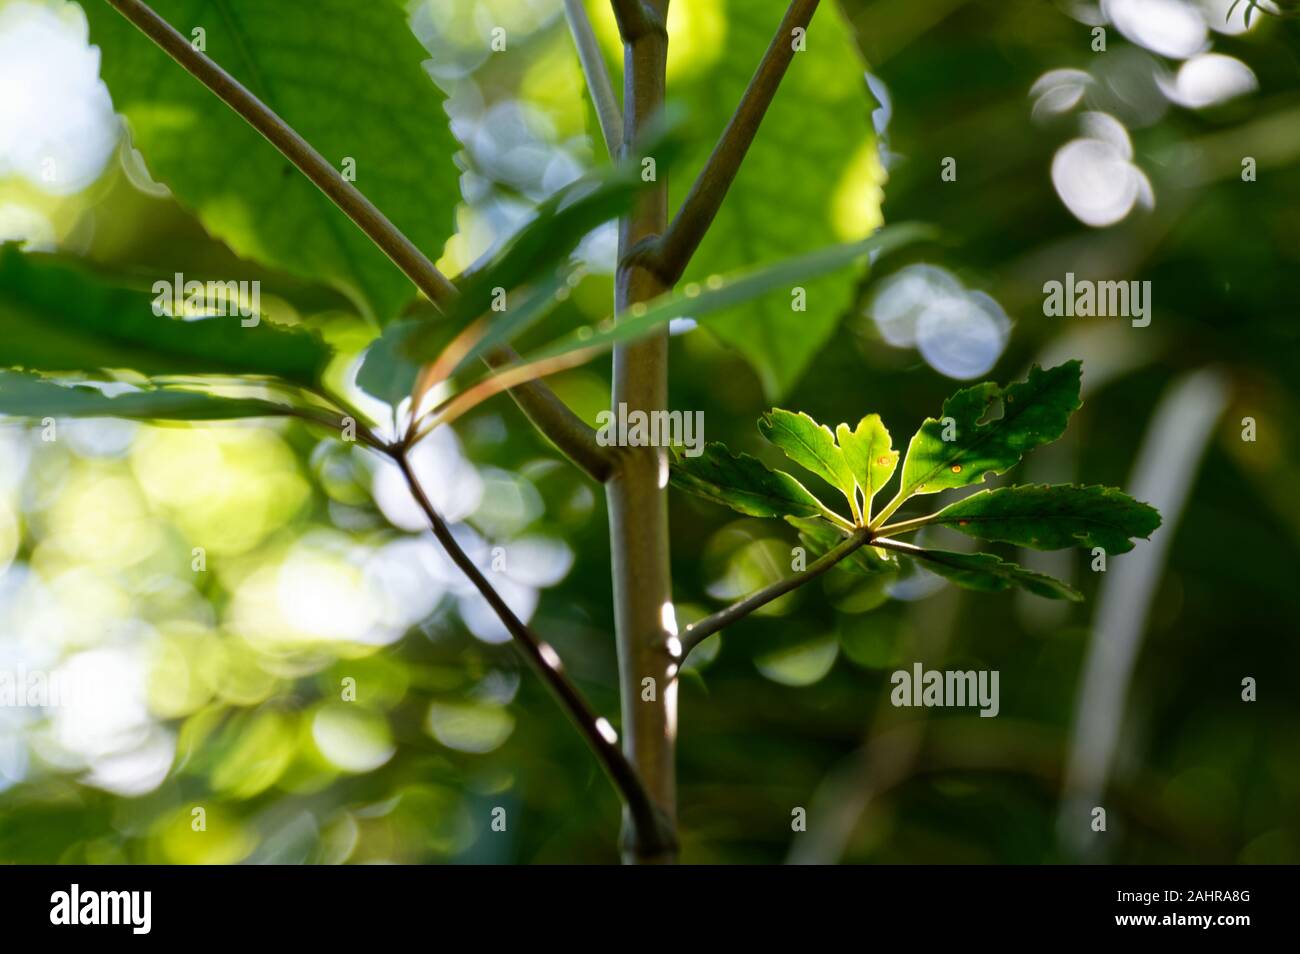 A sun beam picks out the small leaves of a leafy plant. Stock Photo